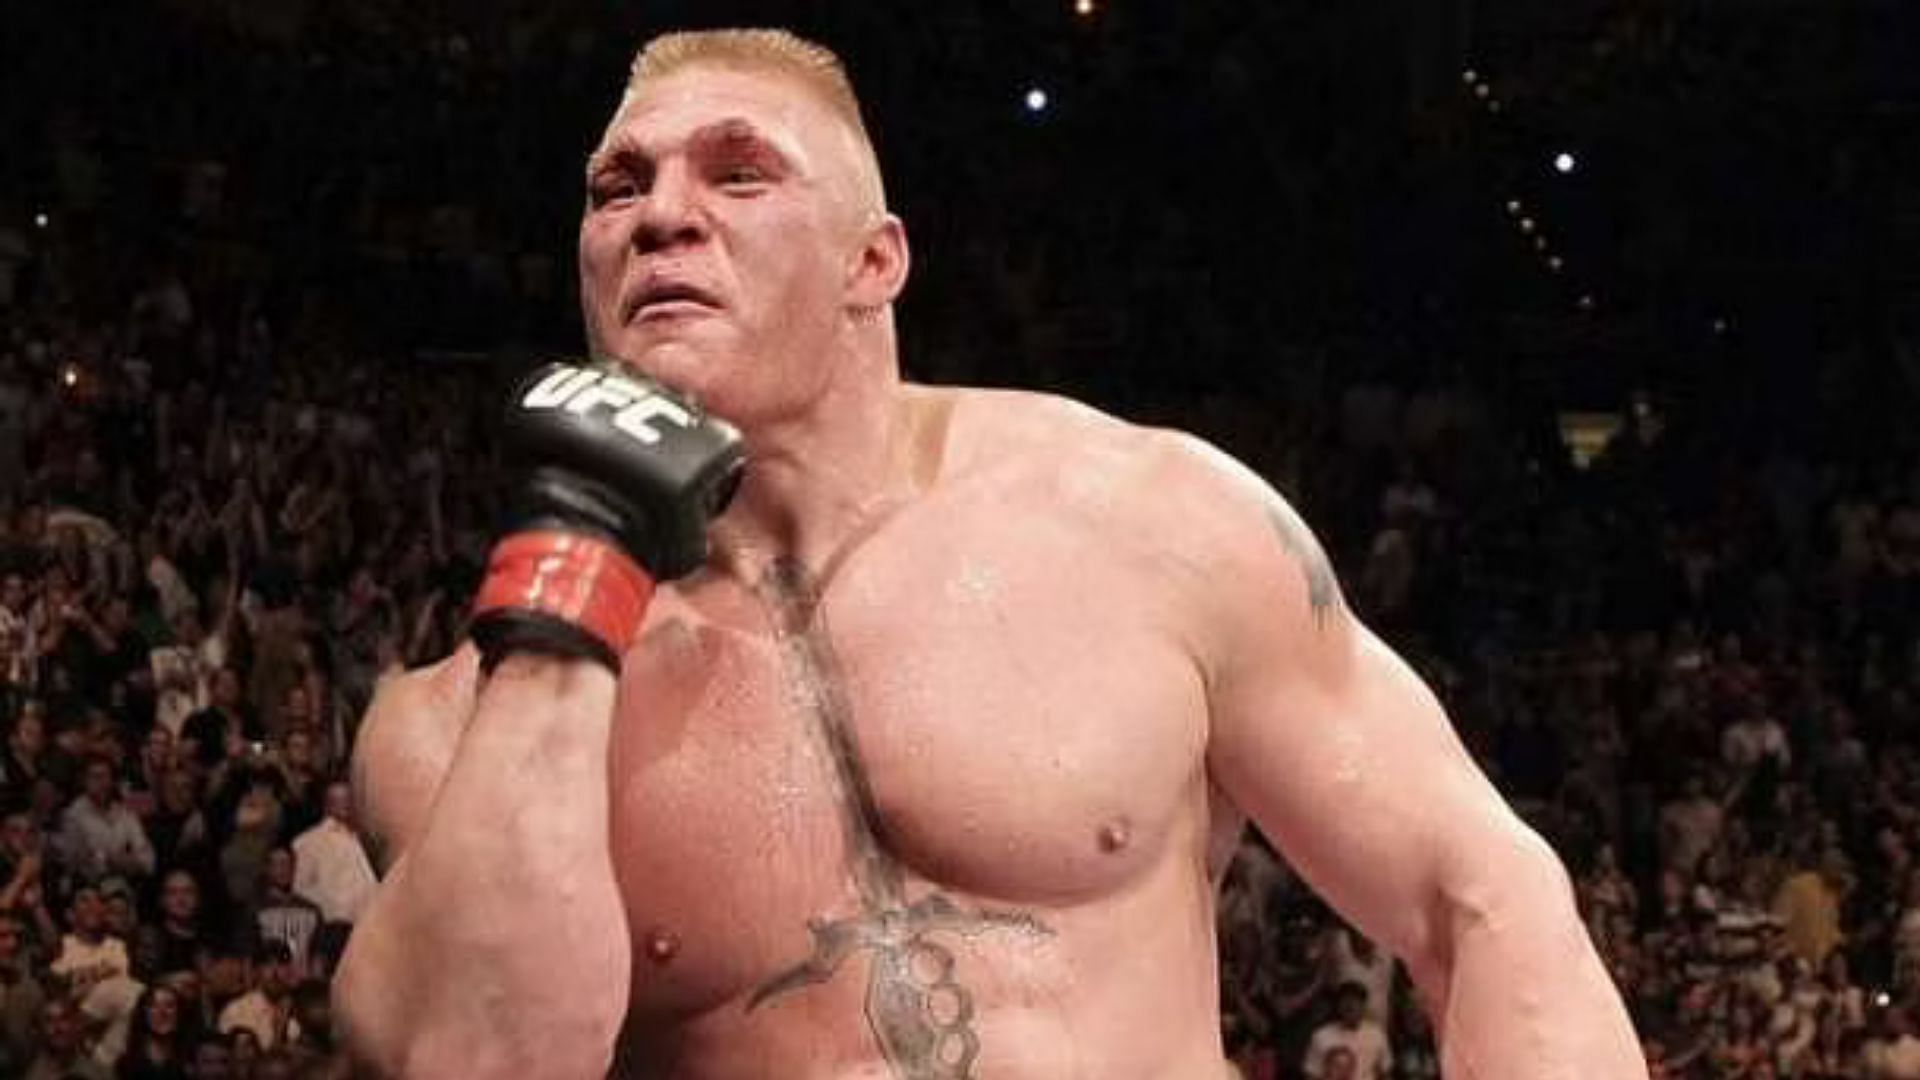 Brock Lesnar has had a successful career in both WWE and UFC